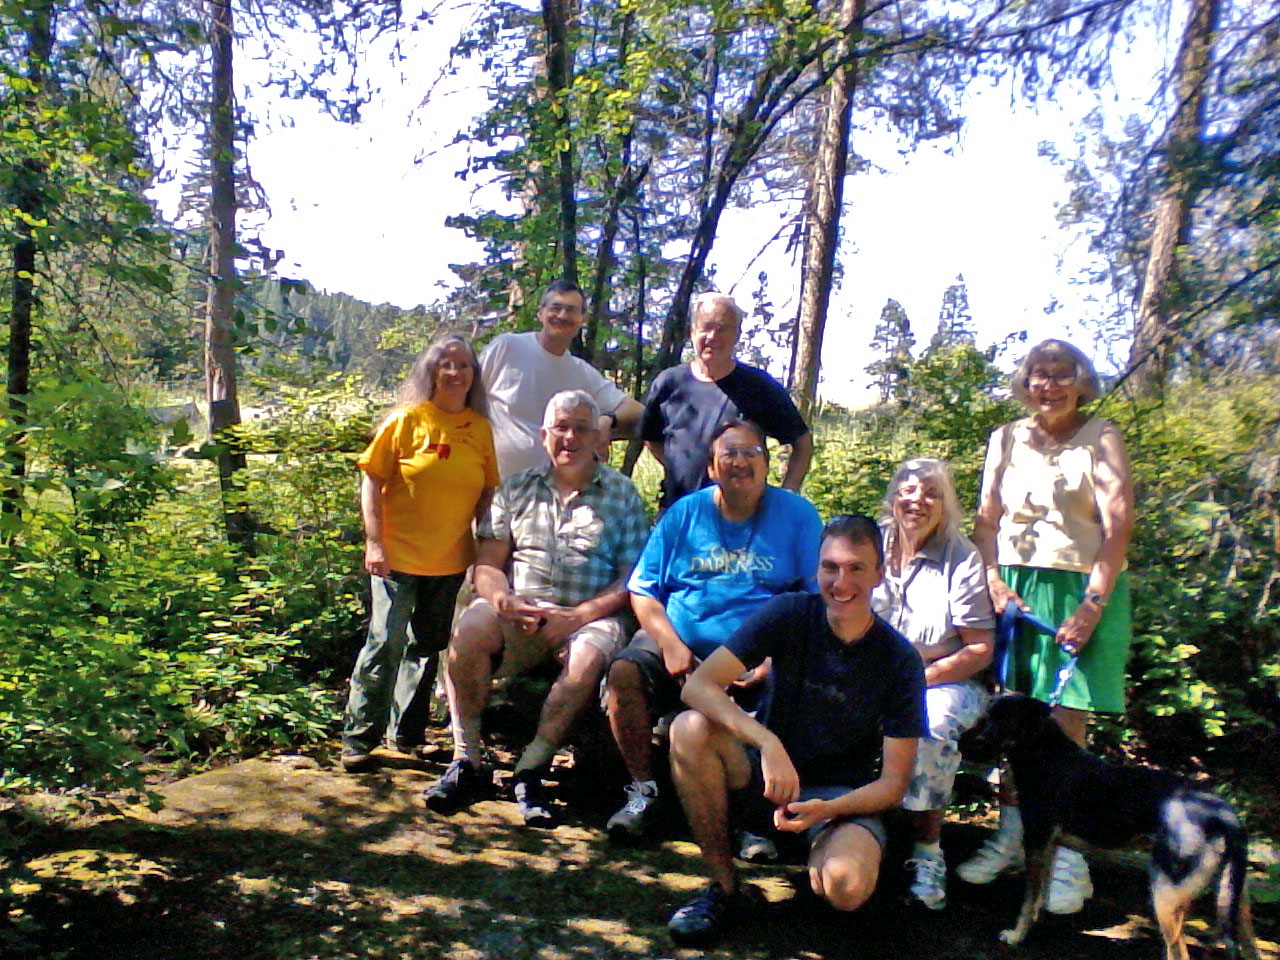 PESC group who attended Tar Sands Healing Walk